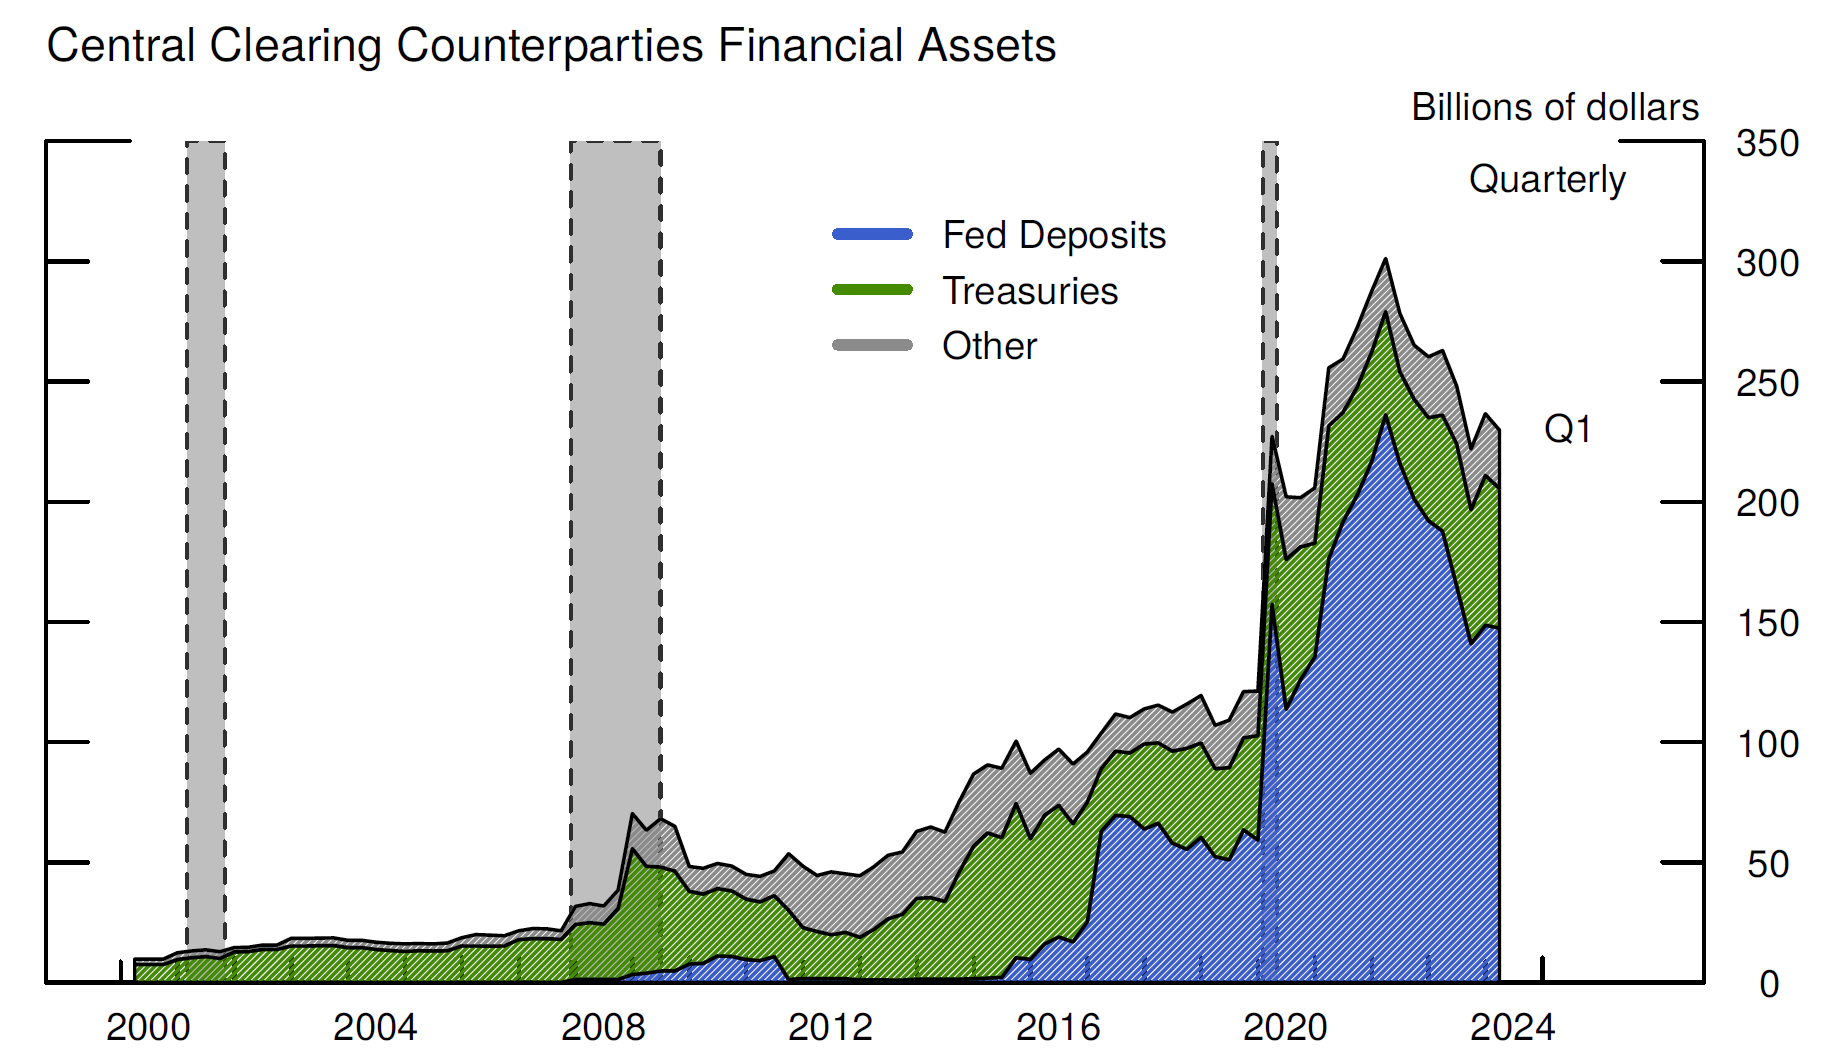 Figure 1. Central Clearing Counterparty Financial Assets. See accessible link for data.